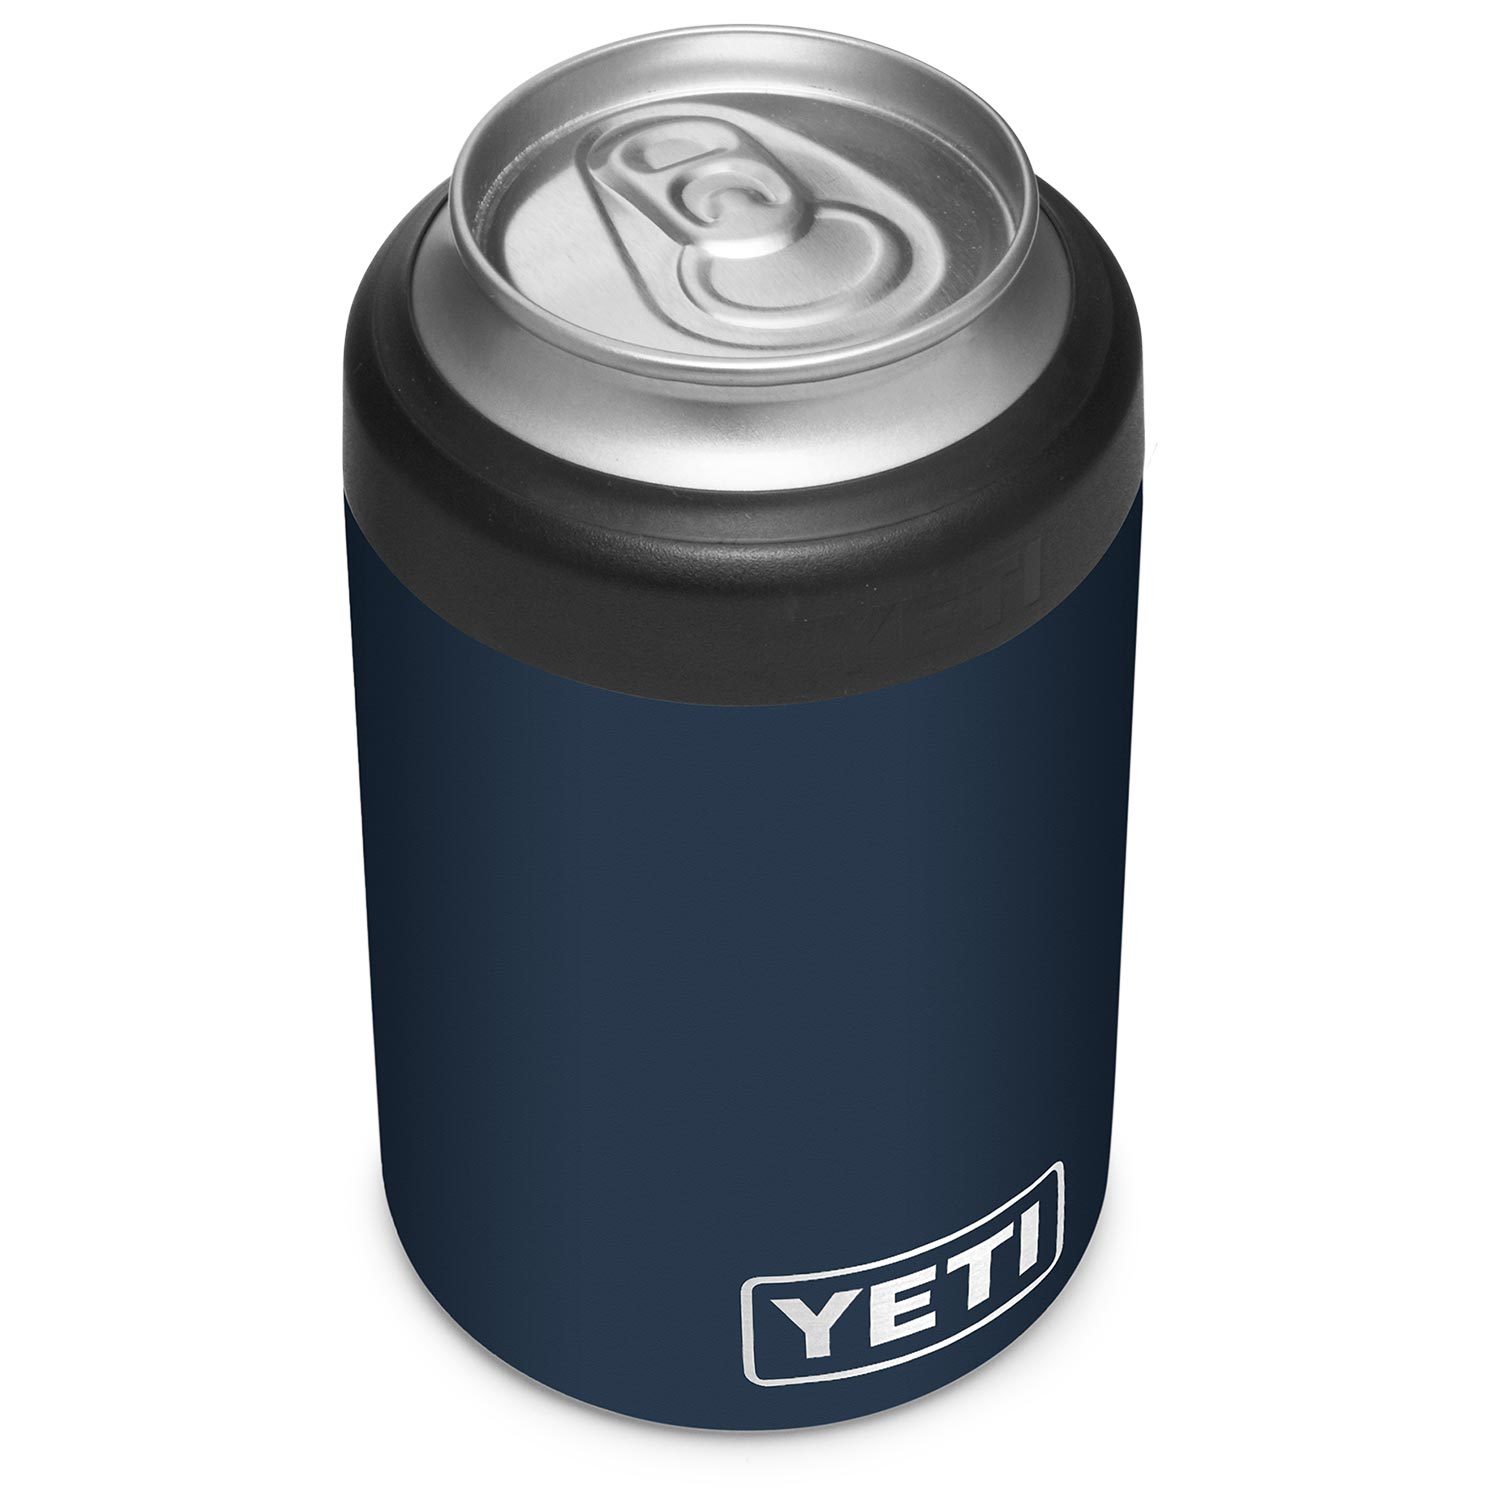  YETI Rambler 12 oz. Colster Can Insulator for Standard Size  Cans, Alpine Yellow : Home & Kitchen